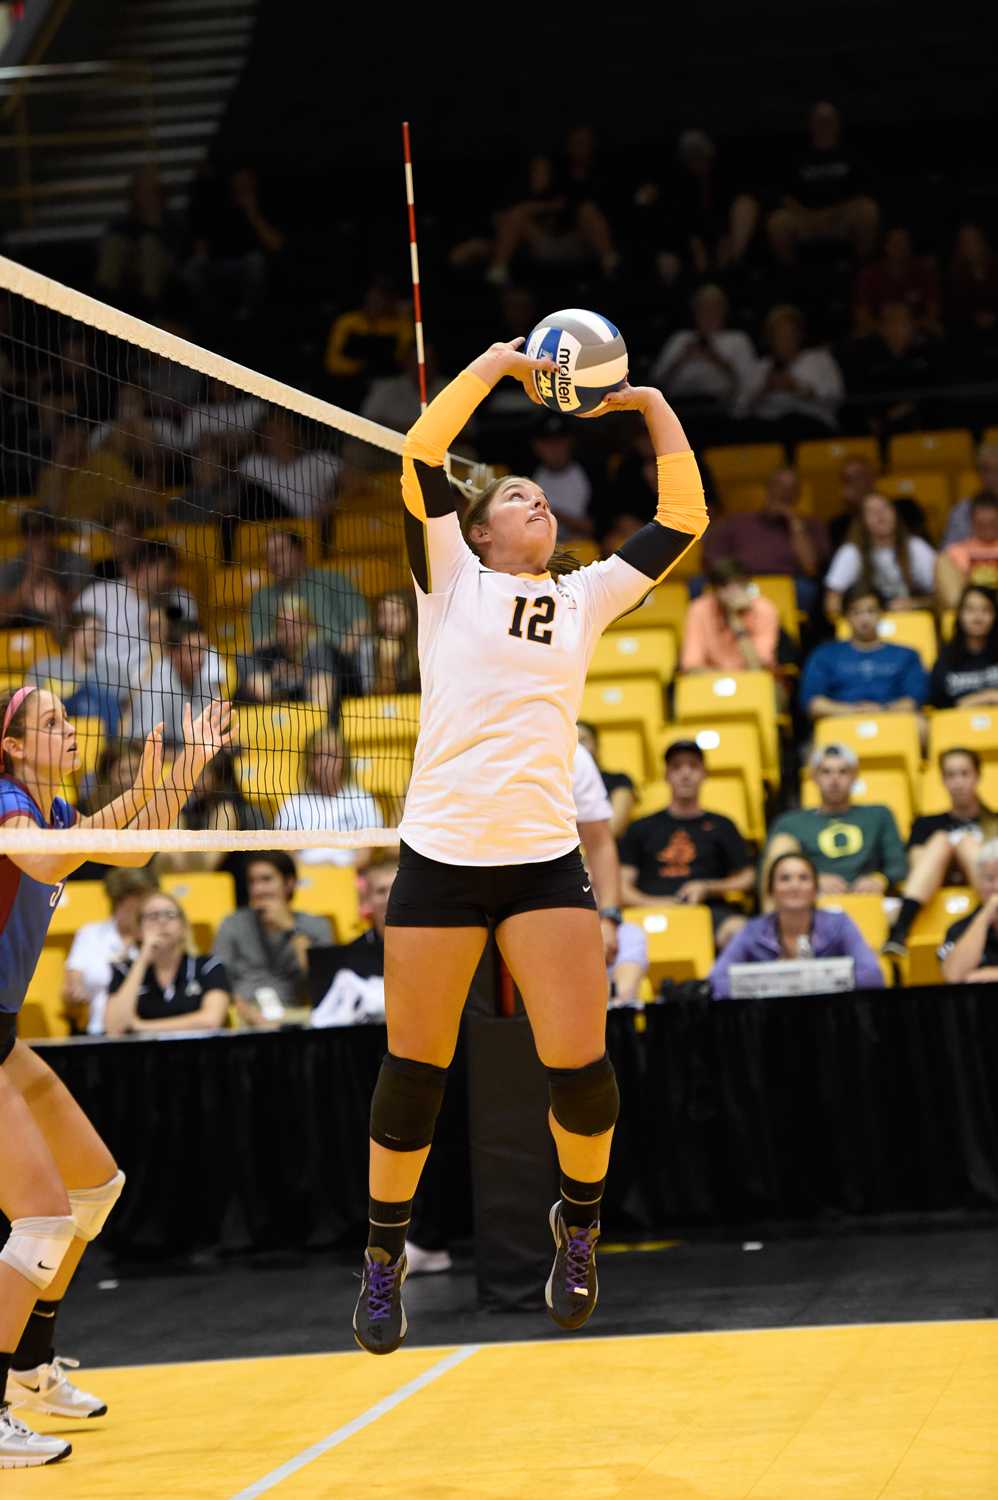 Senior setter Paige Brown's impressive records during the 2014-2015 season earned her this year's Sun Belt Preseason Setter of the Year honor. Photo by Justin Perry.